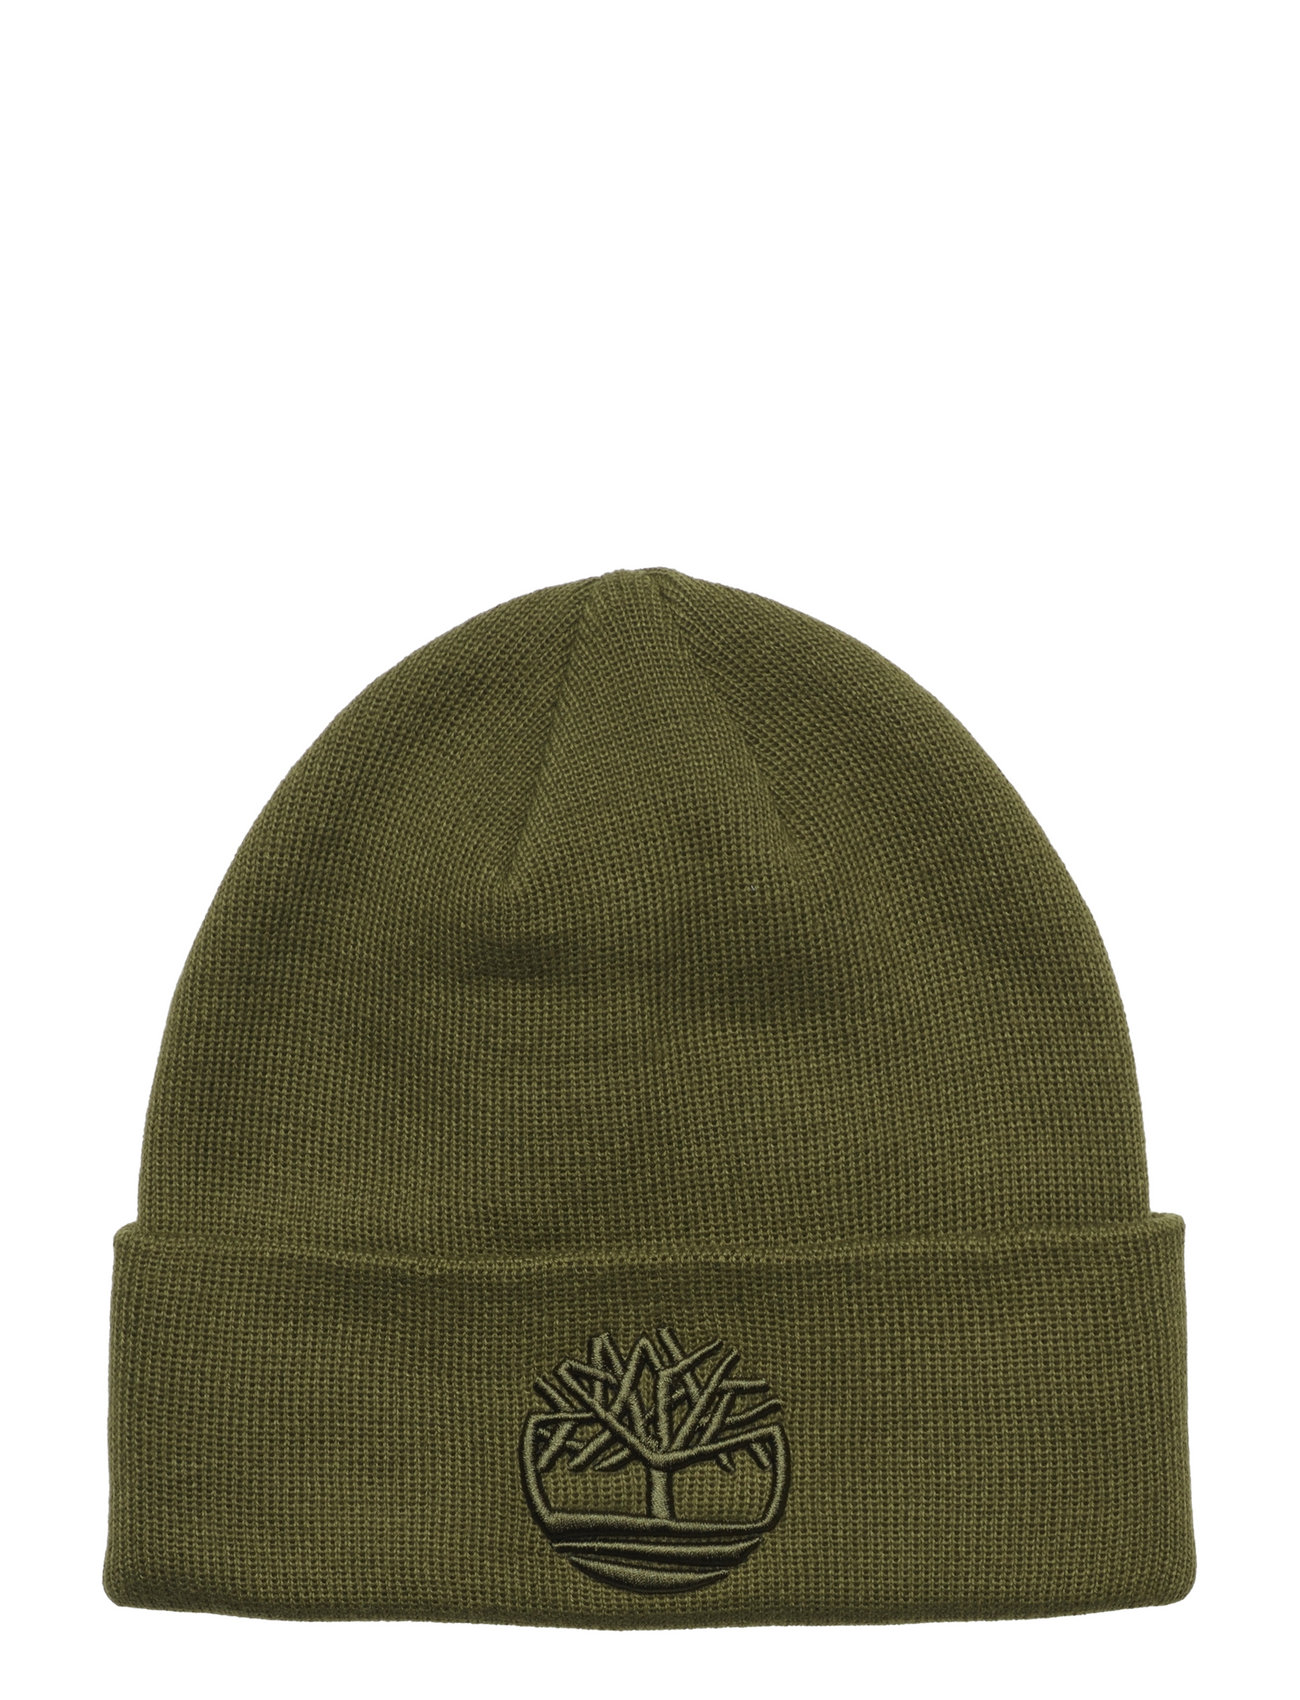 Timberland Tonal 3d Embroidery Beanie - Hats